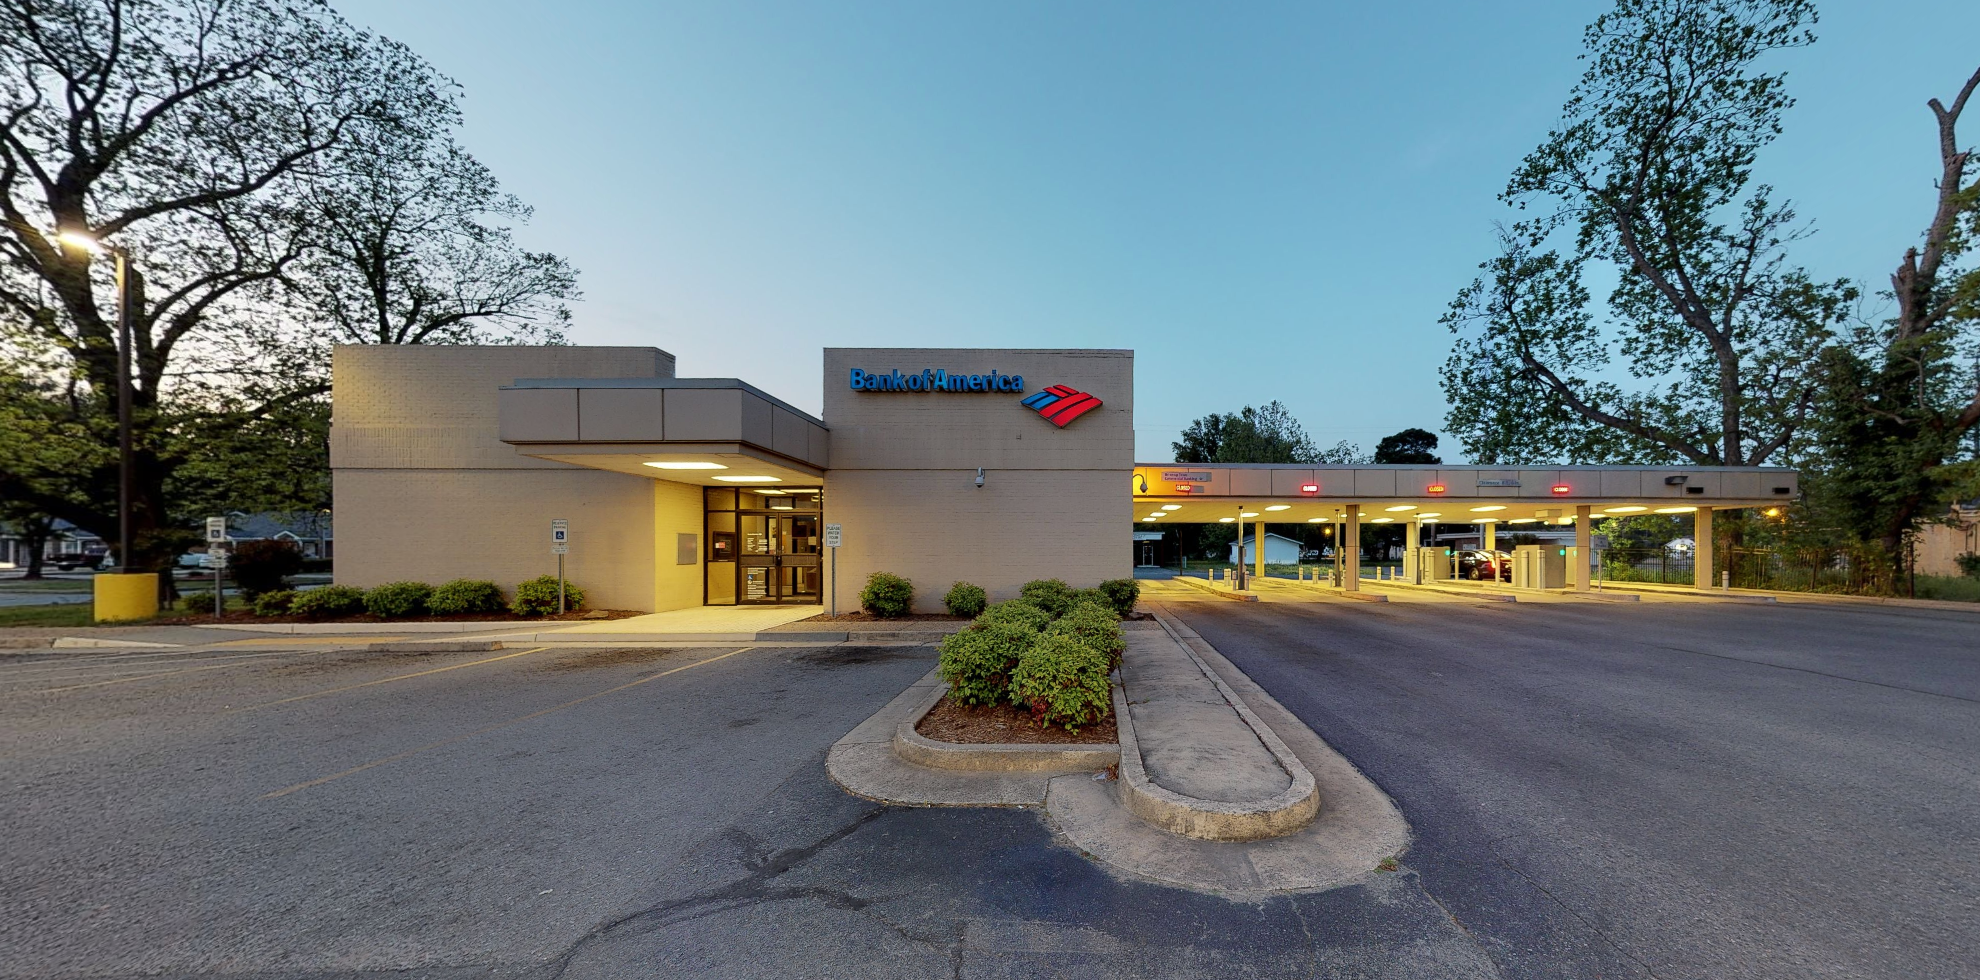 Bank of America financial center with drive-thru ATM and teller | 2219 W 28th St, Pine Bluff, AR 71603